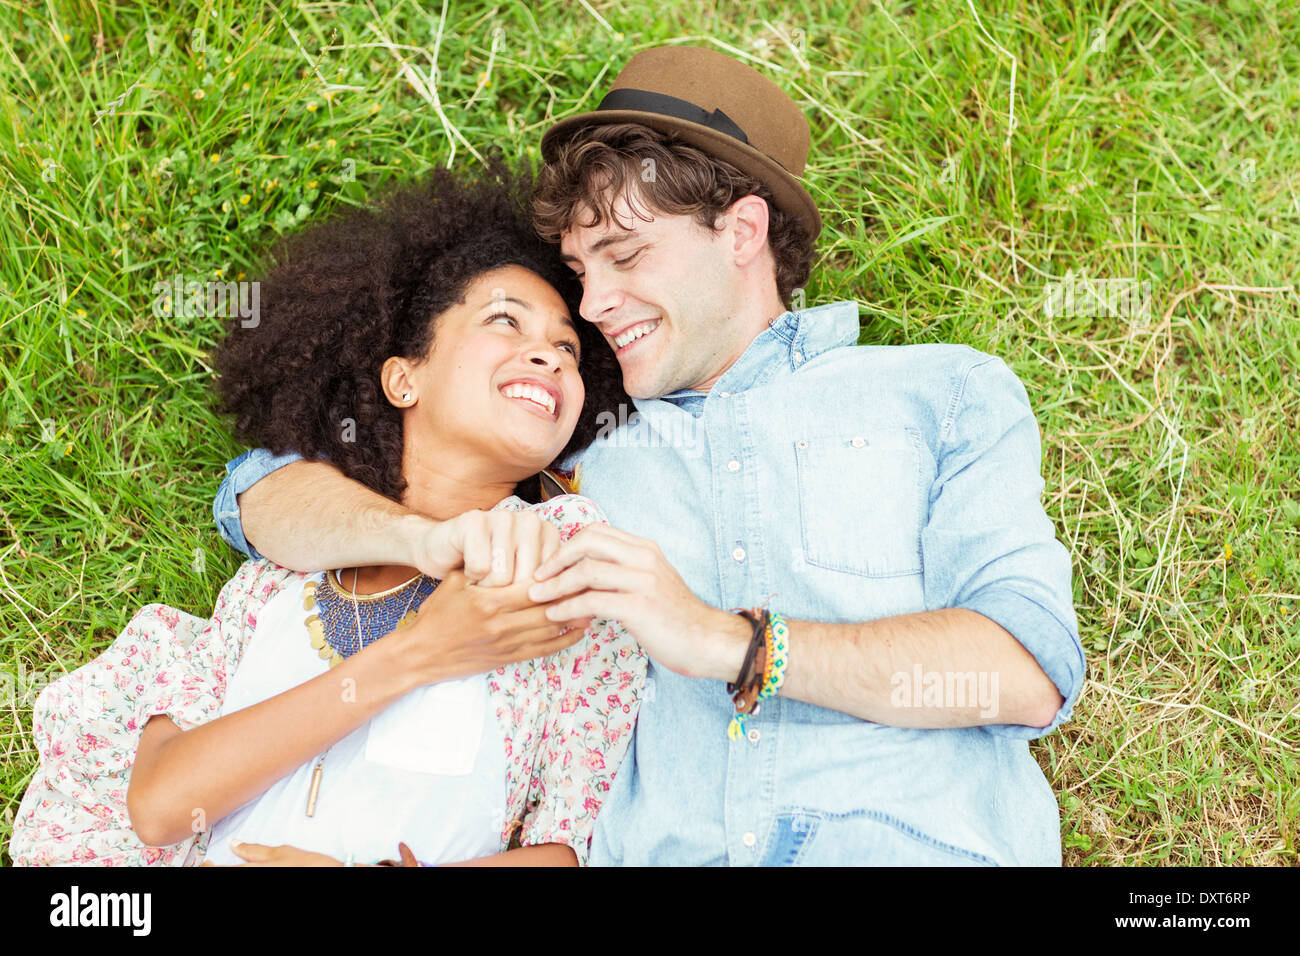 Heureux couple holding hands and laying in grass Banque D'Images